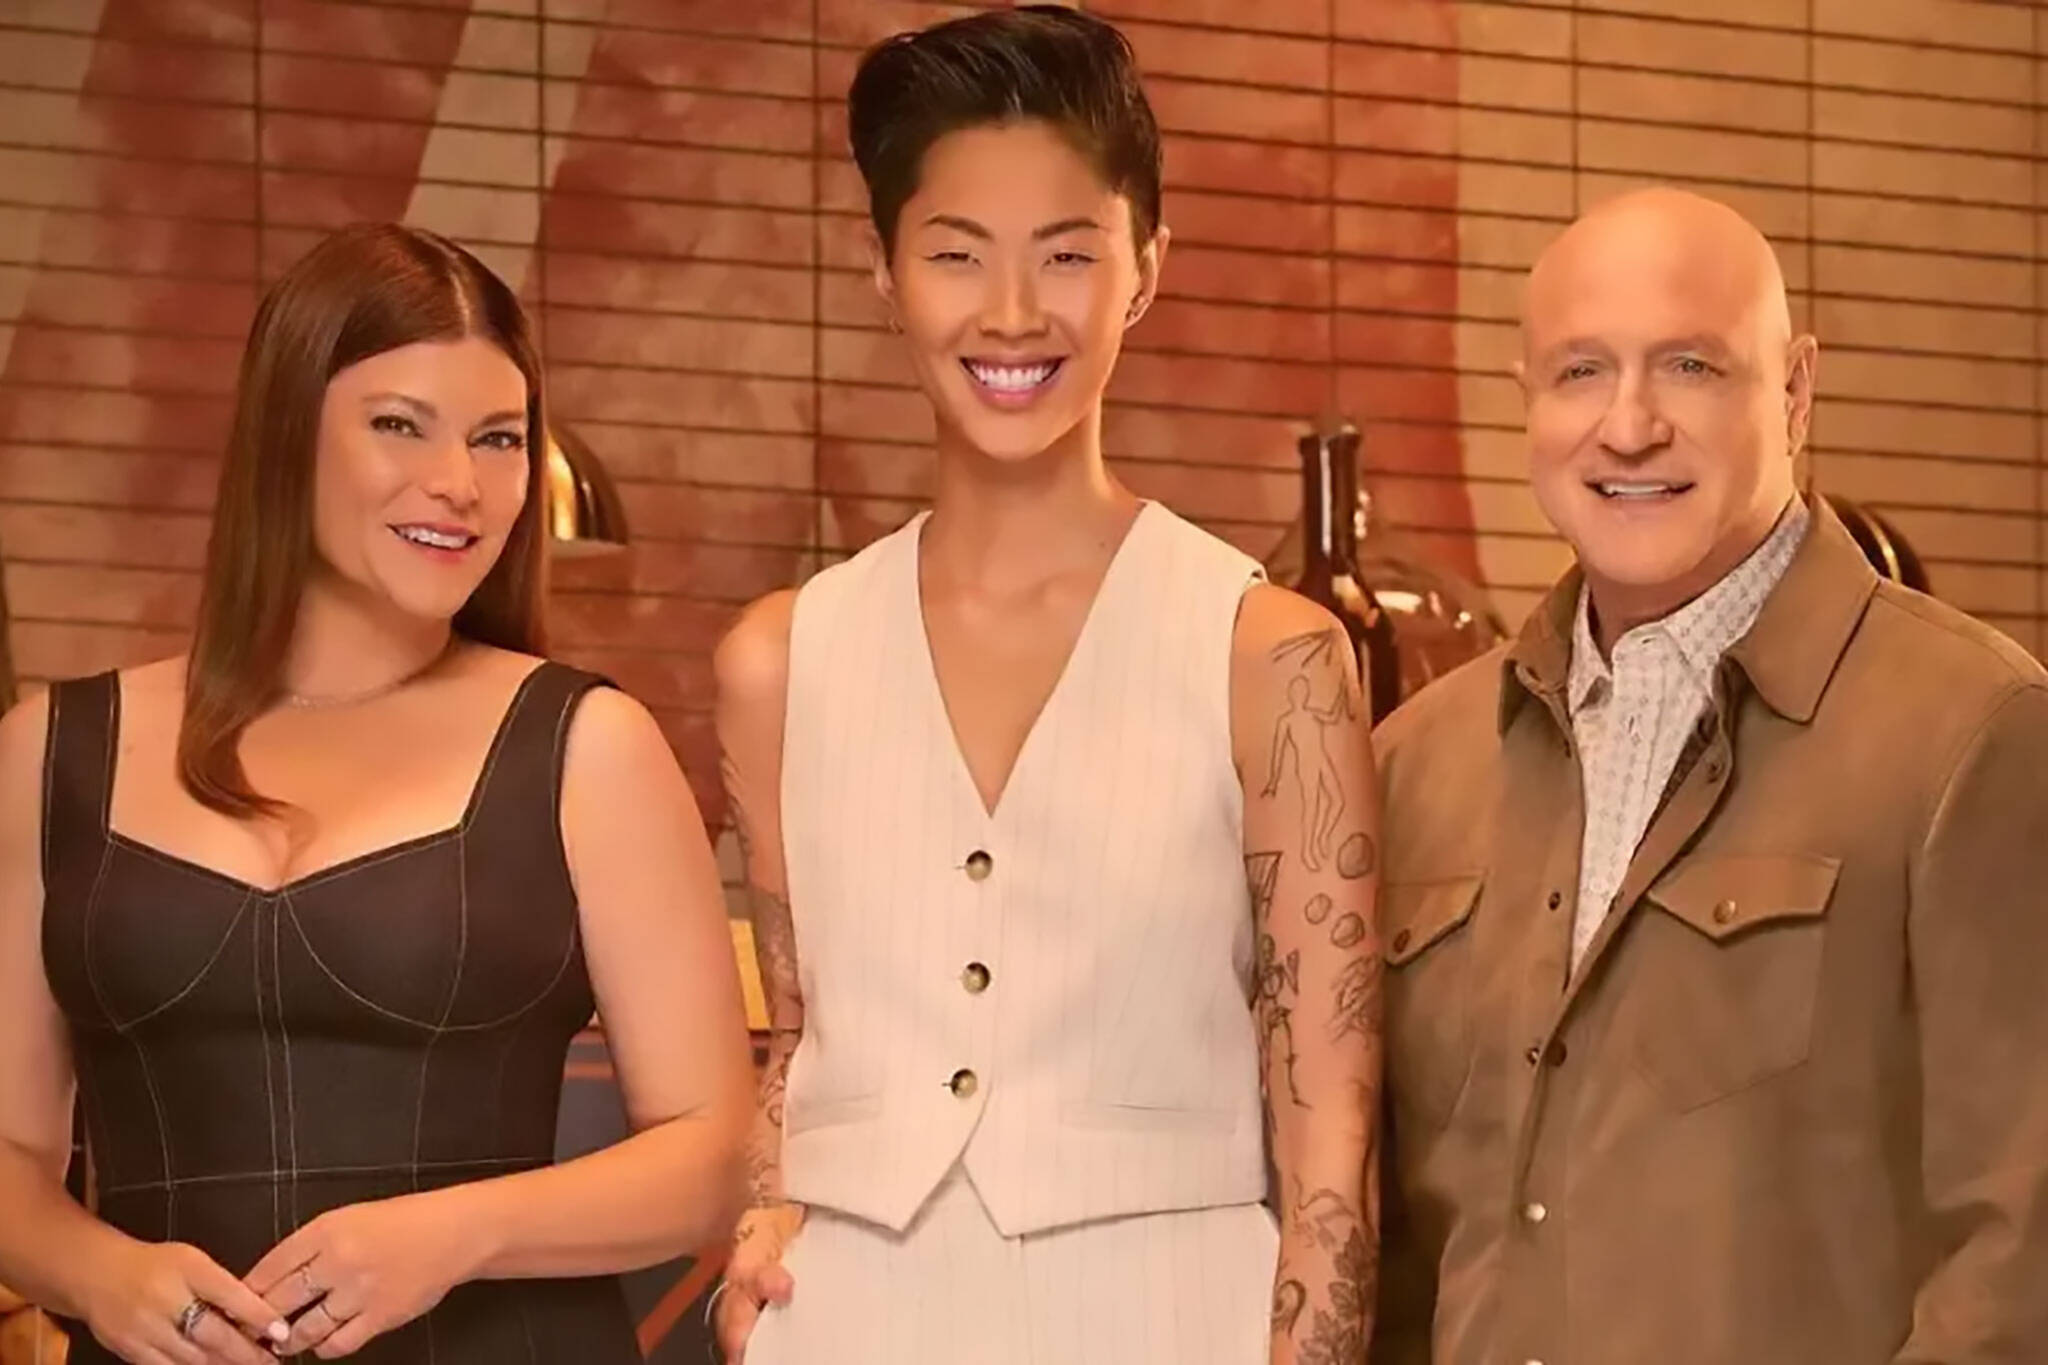 Top Chef Season 22 to Film in Canada with Host Kristen Kish